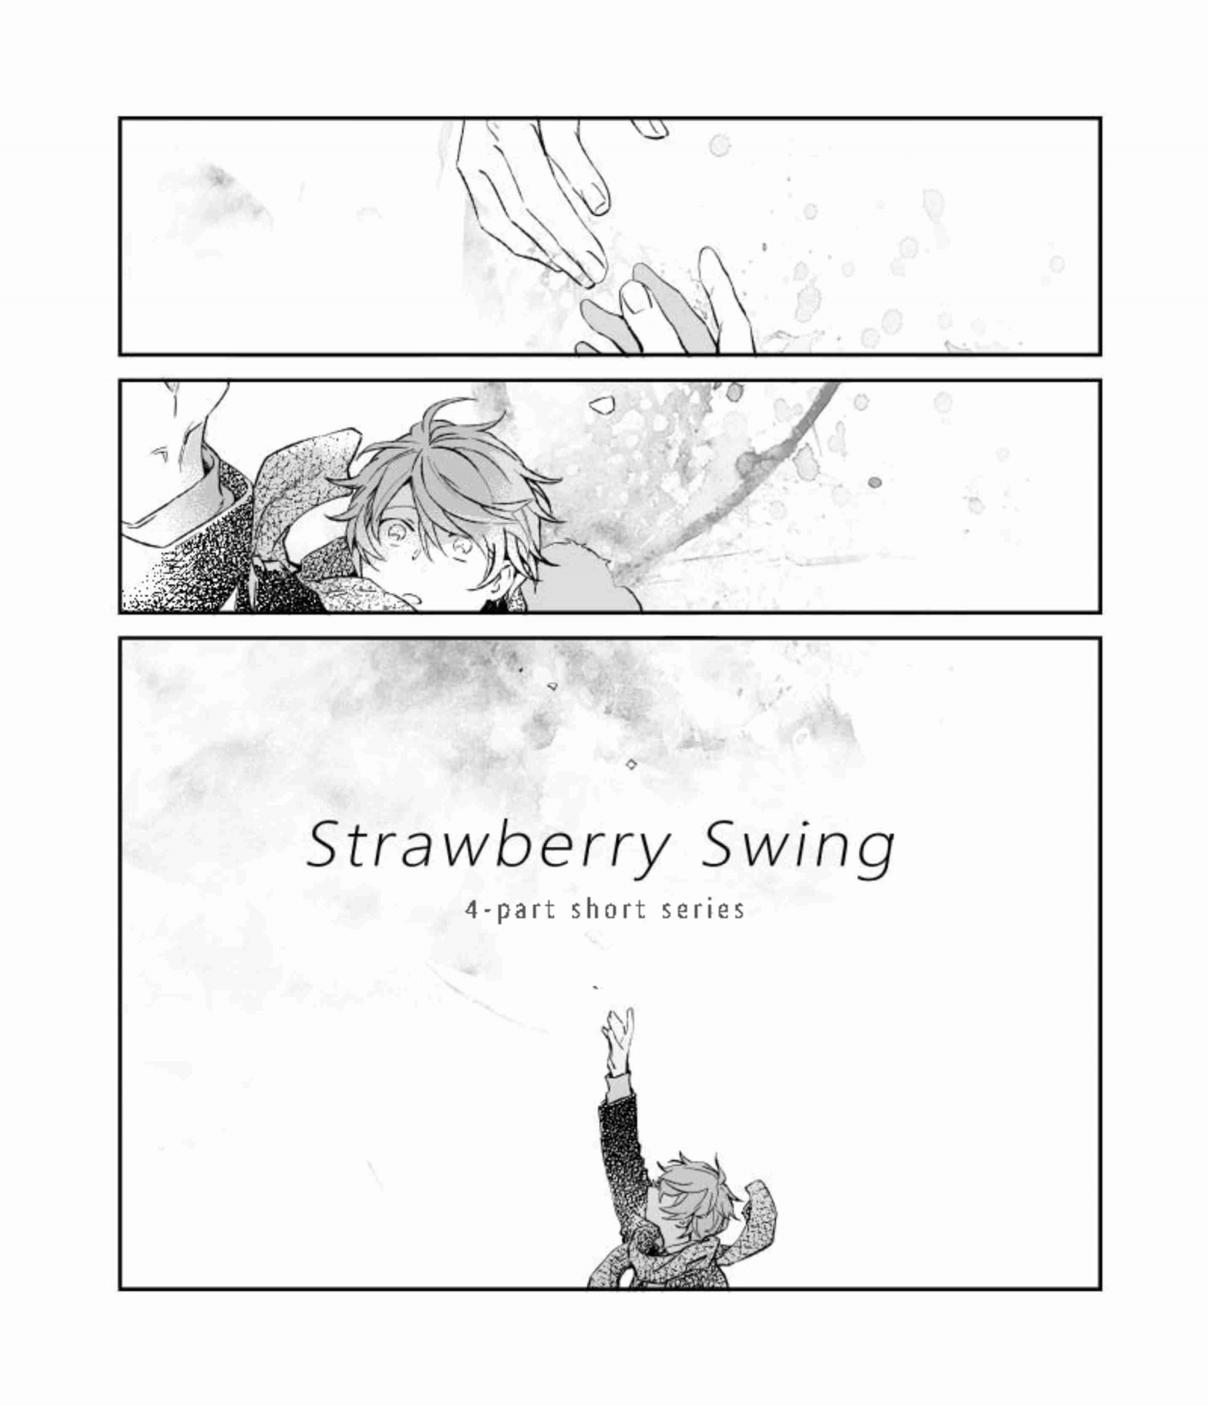 Given Ch. 32.9 Strawberry Swing Pt 1&2